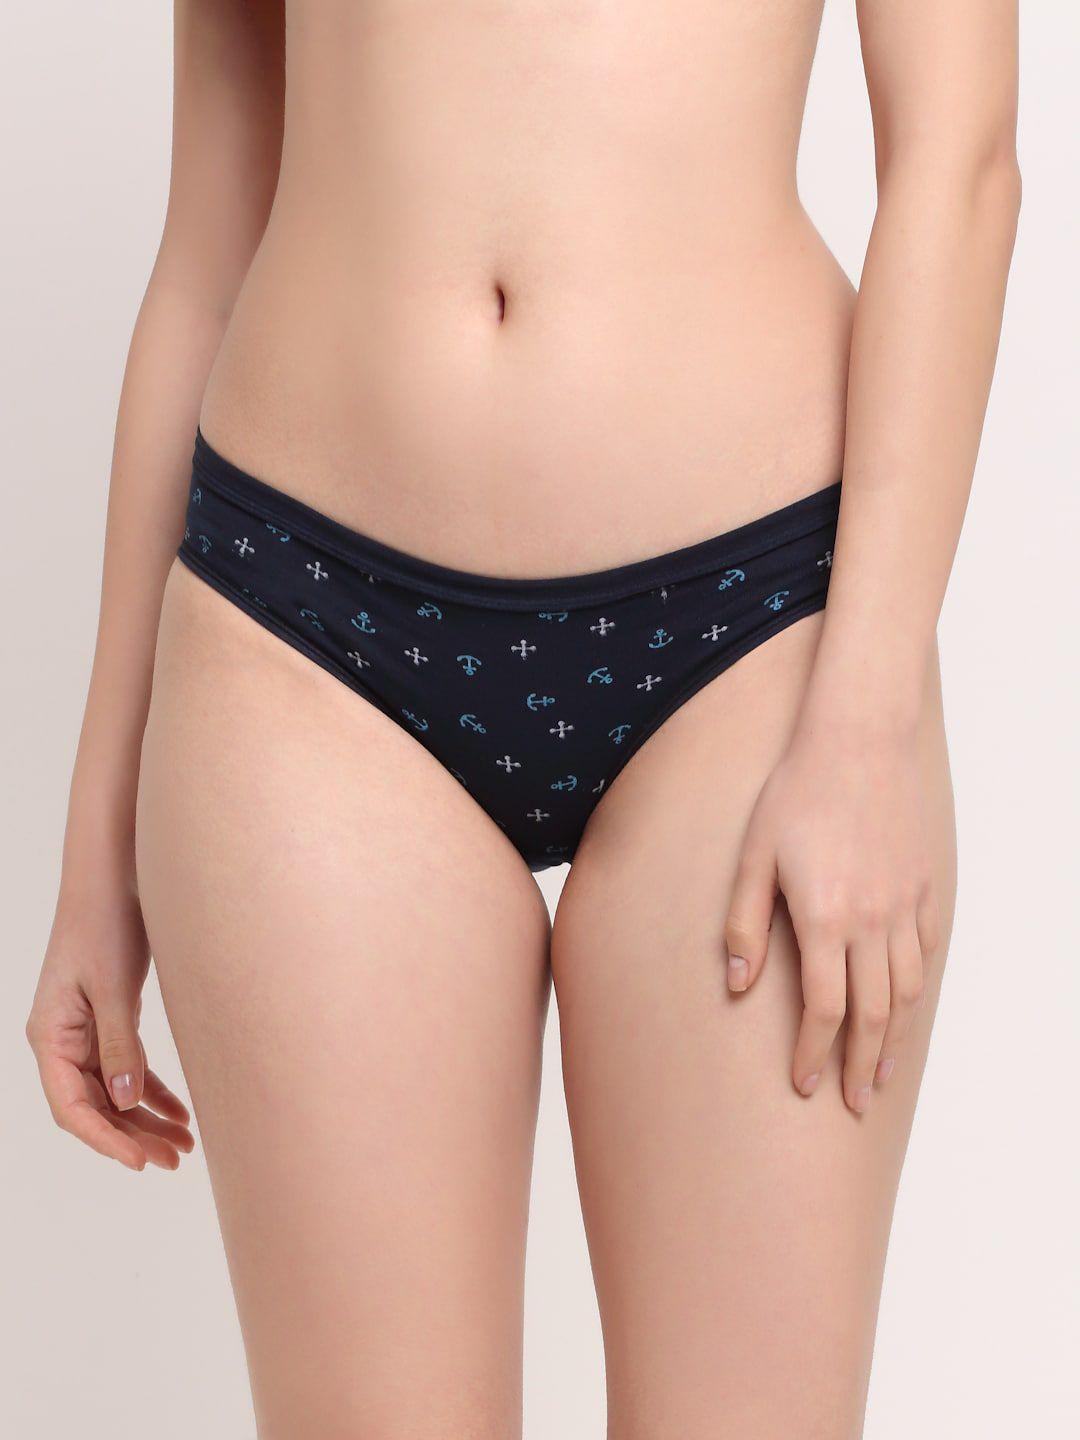 friskers-women-navy-blue-printed-basic-briefs-o-324-17-s